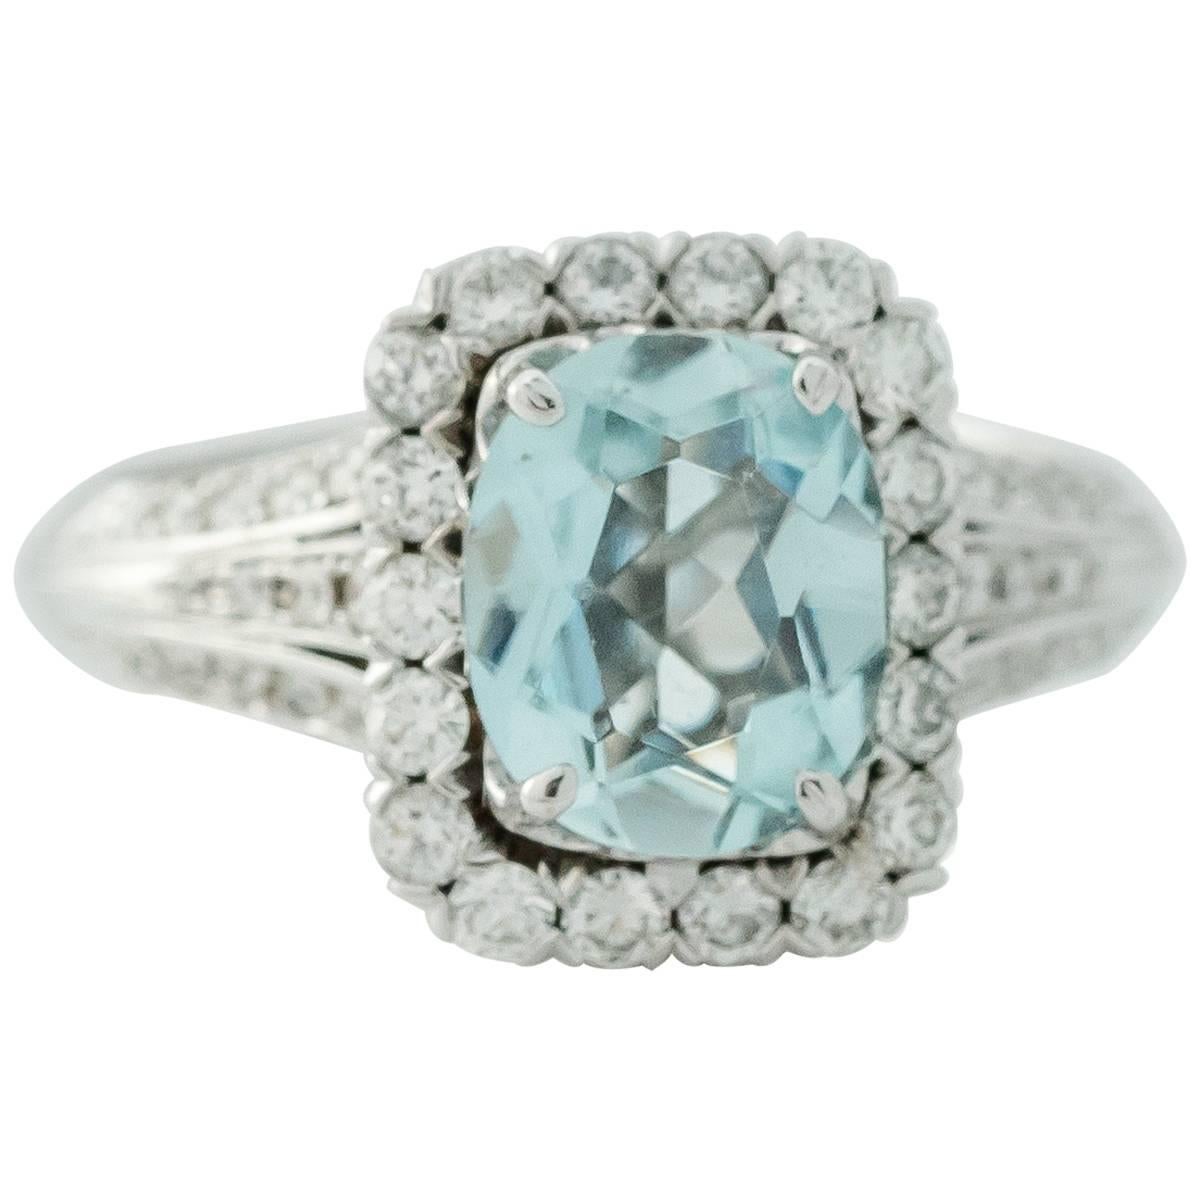 1990s 3 Carat Aquamarine with Diamond Halo and 14K Gold Ring For Sale